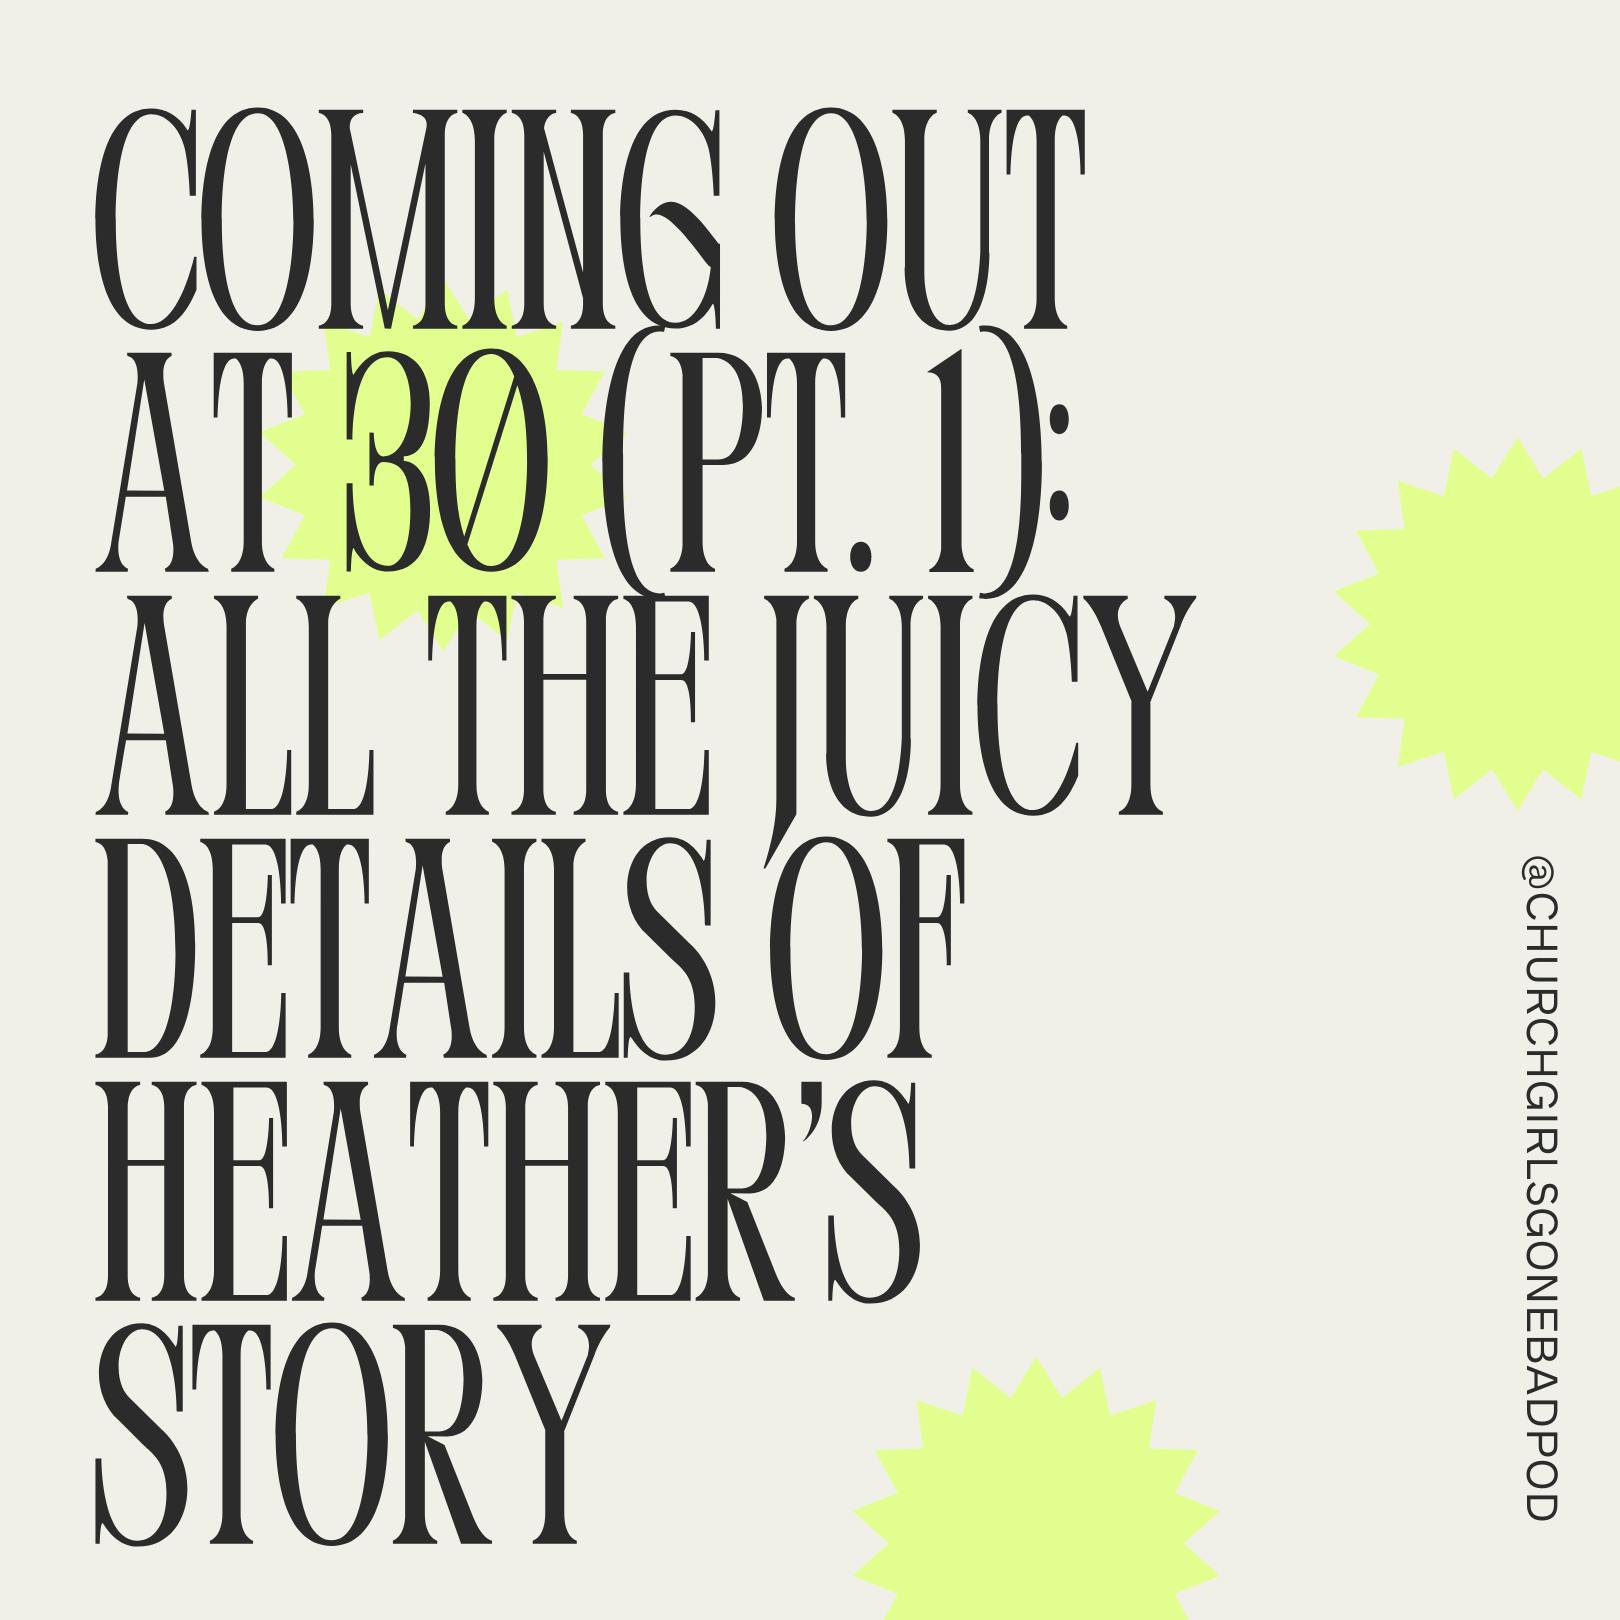 Coming Out at 30 (Pt. 1): All the Juicy Details of Heather’s Story